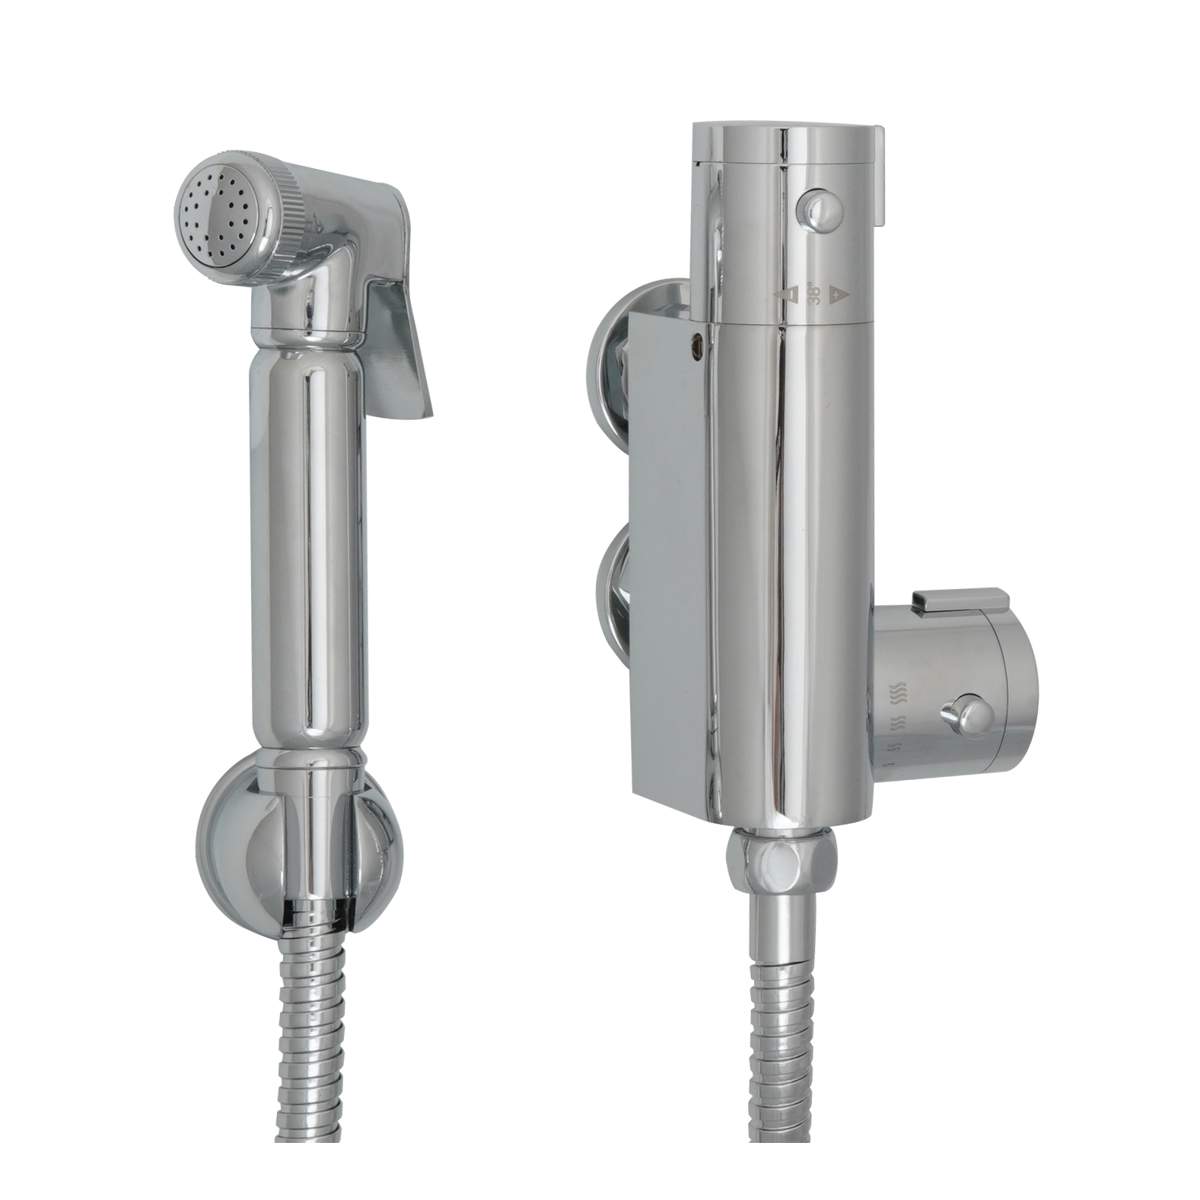 JTP Douche Kit Complete with Vertical Thermostatic Bar Valve (557)